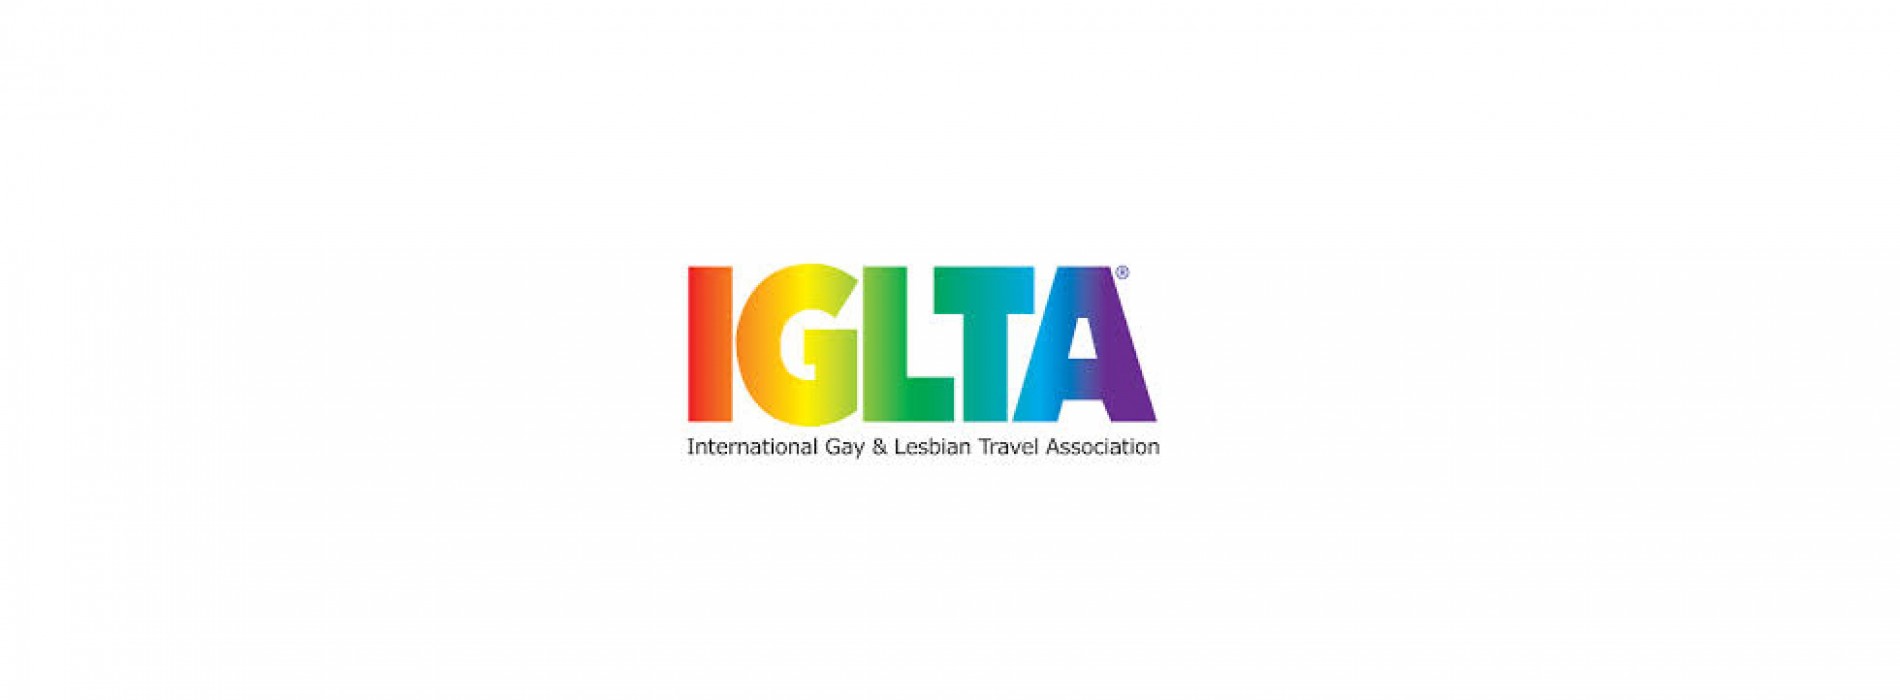 LGBT tourism in Argentina was Awarded in the United States